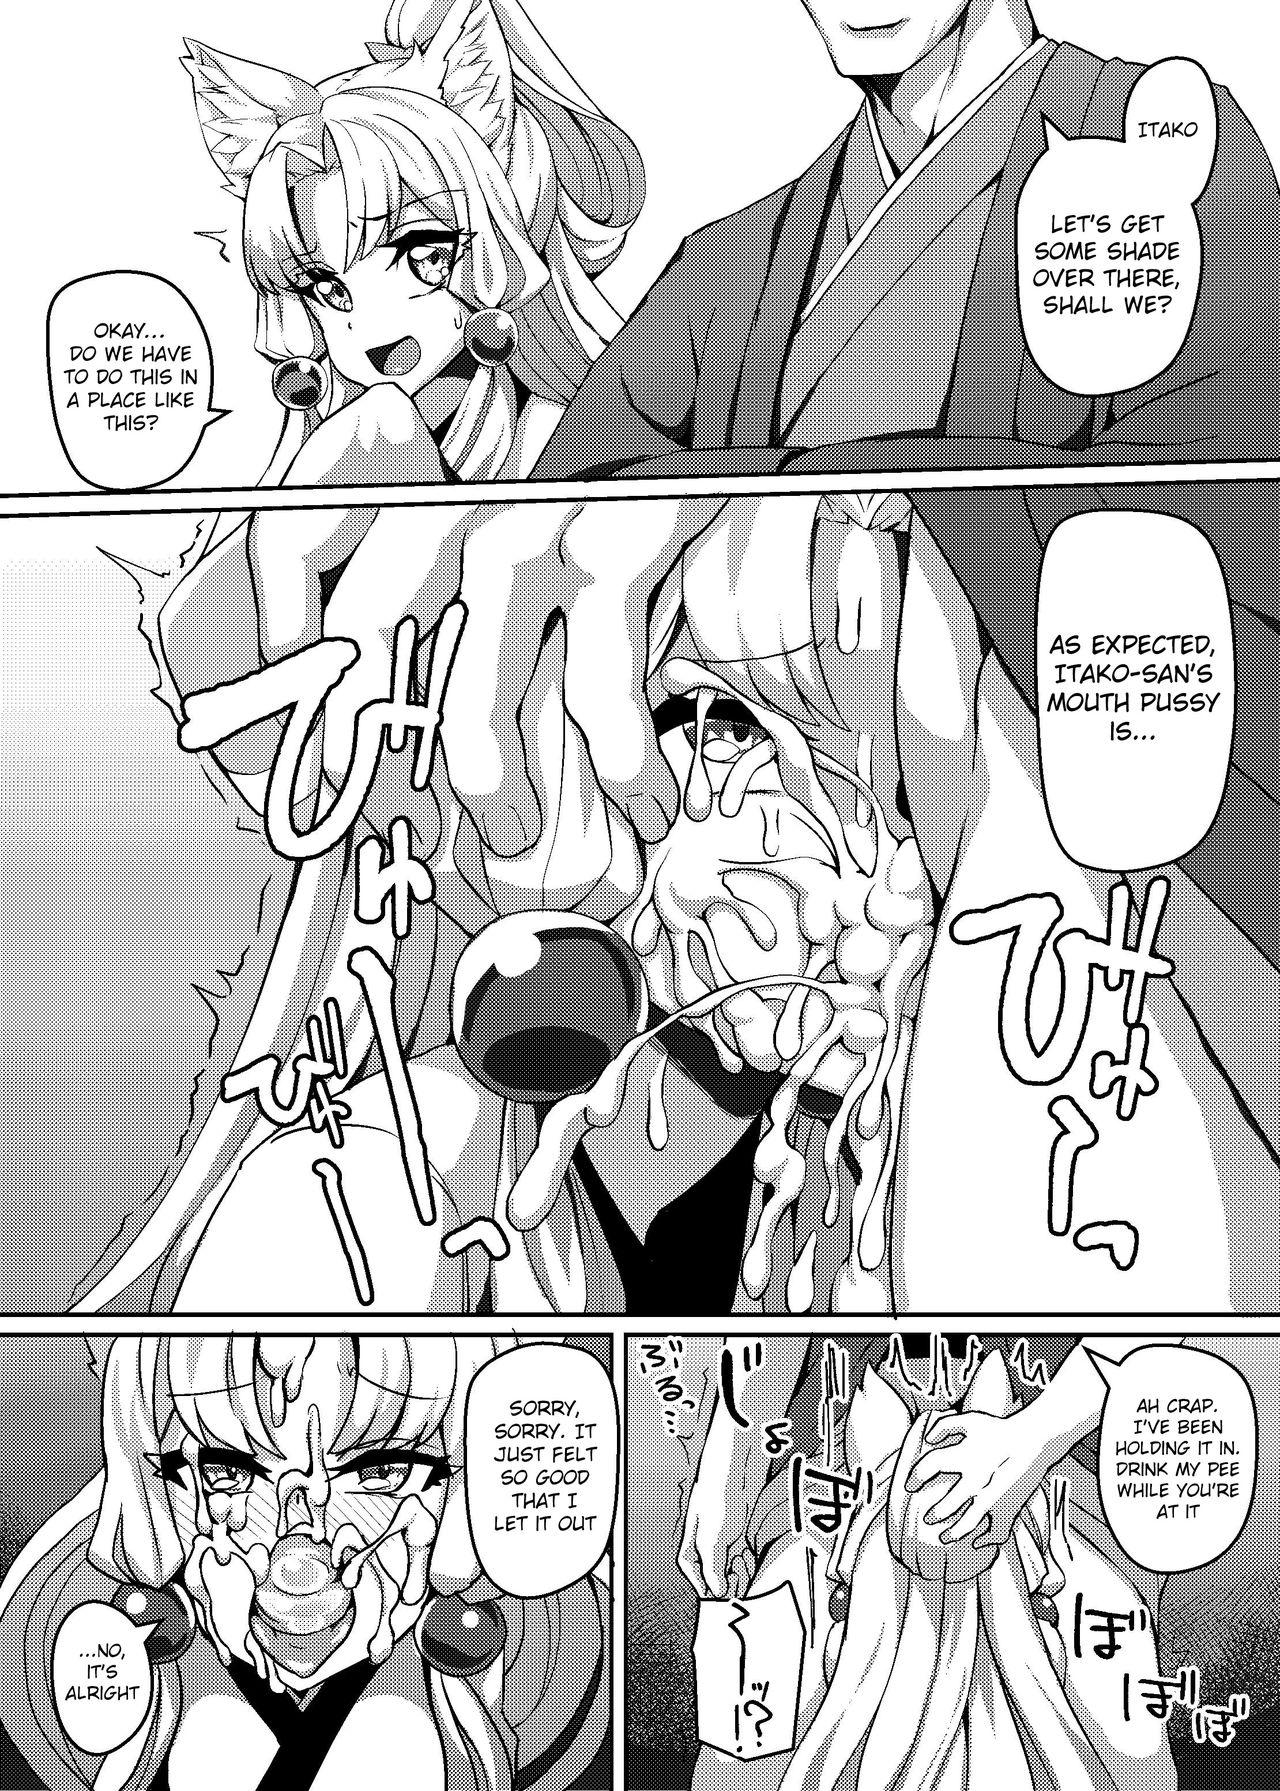 Passionate Talk Character Okuchi Only Book - Vocaloid Voiceroid Sucks - Page 10